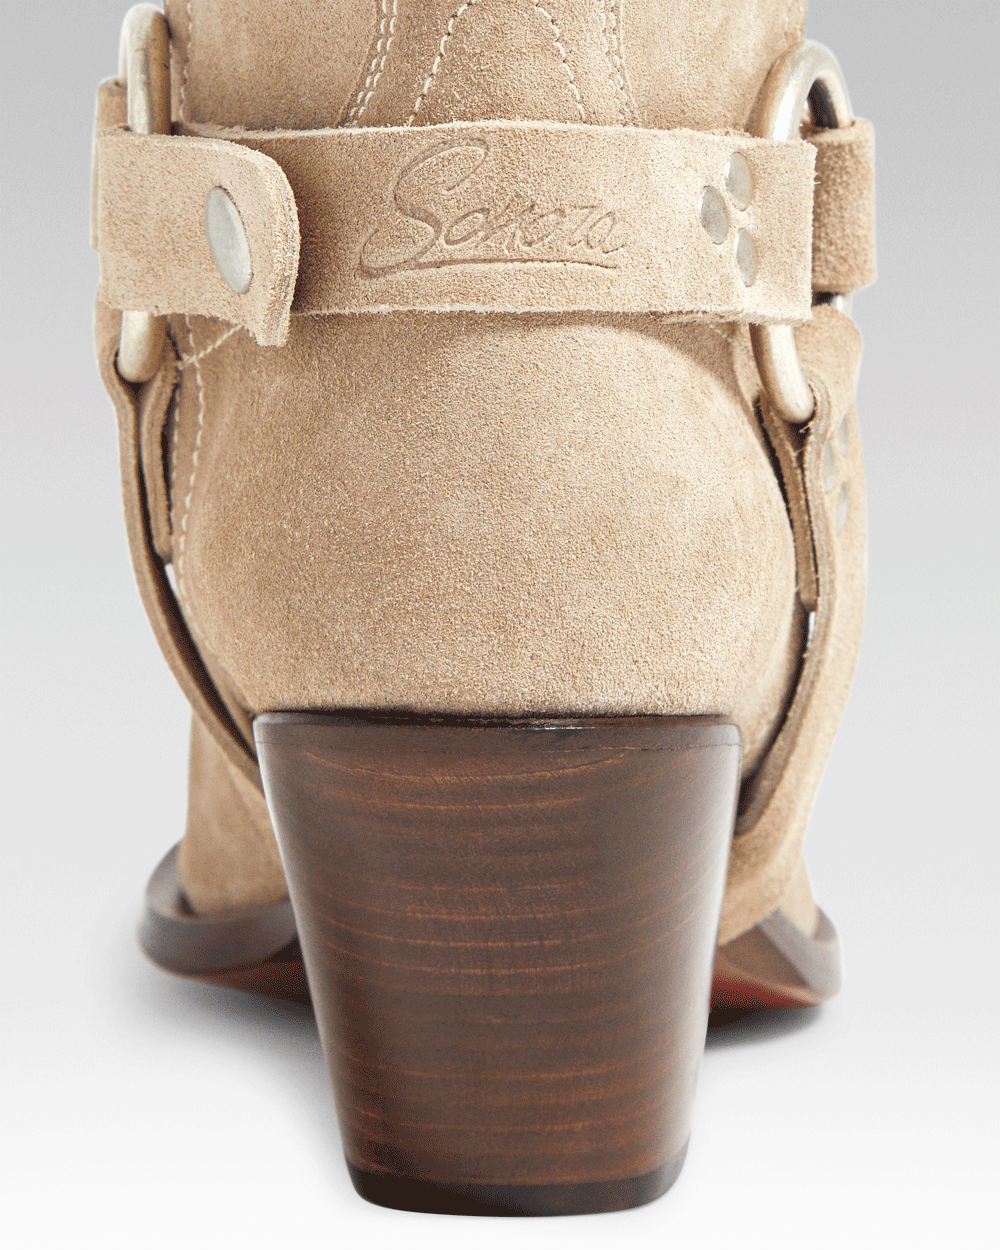 ATOKA BELT  Women's Ankle Boots in Sand Suede | Leather Harness